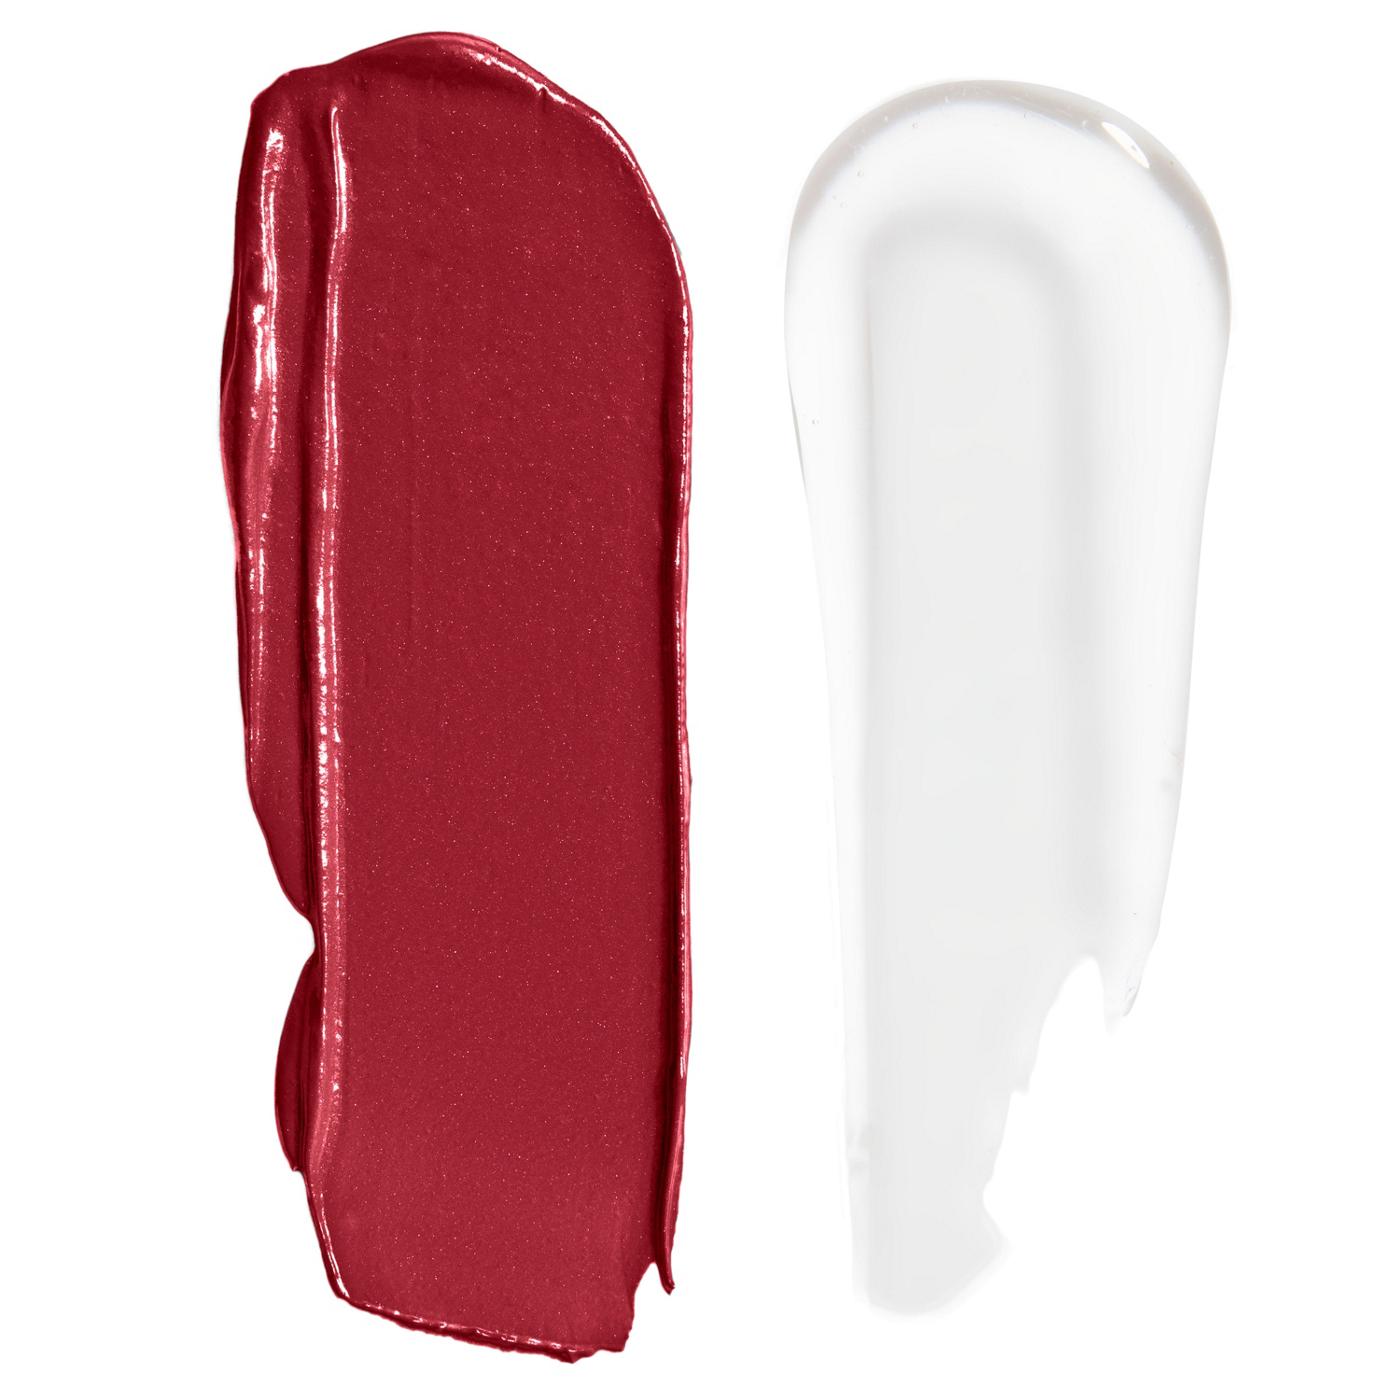 Wet n Wild MegaLast Lock N Shine Lip Gloss - Pout Energy; image 2 of 3